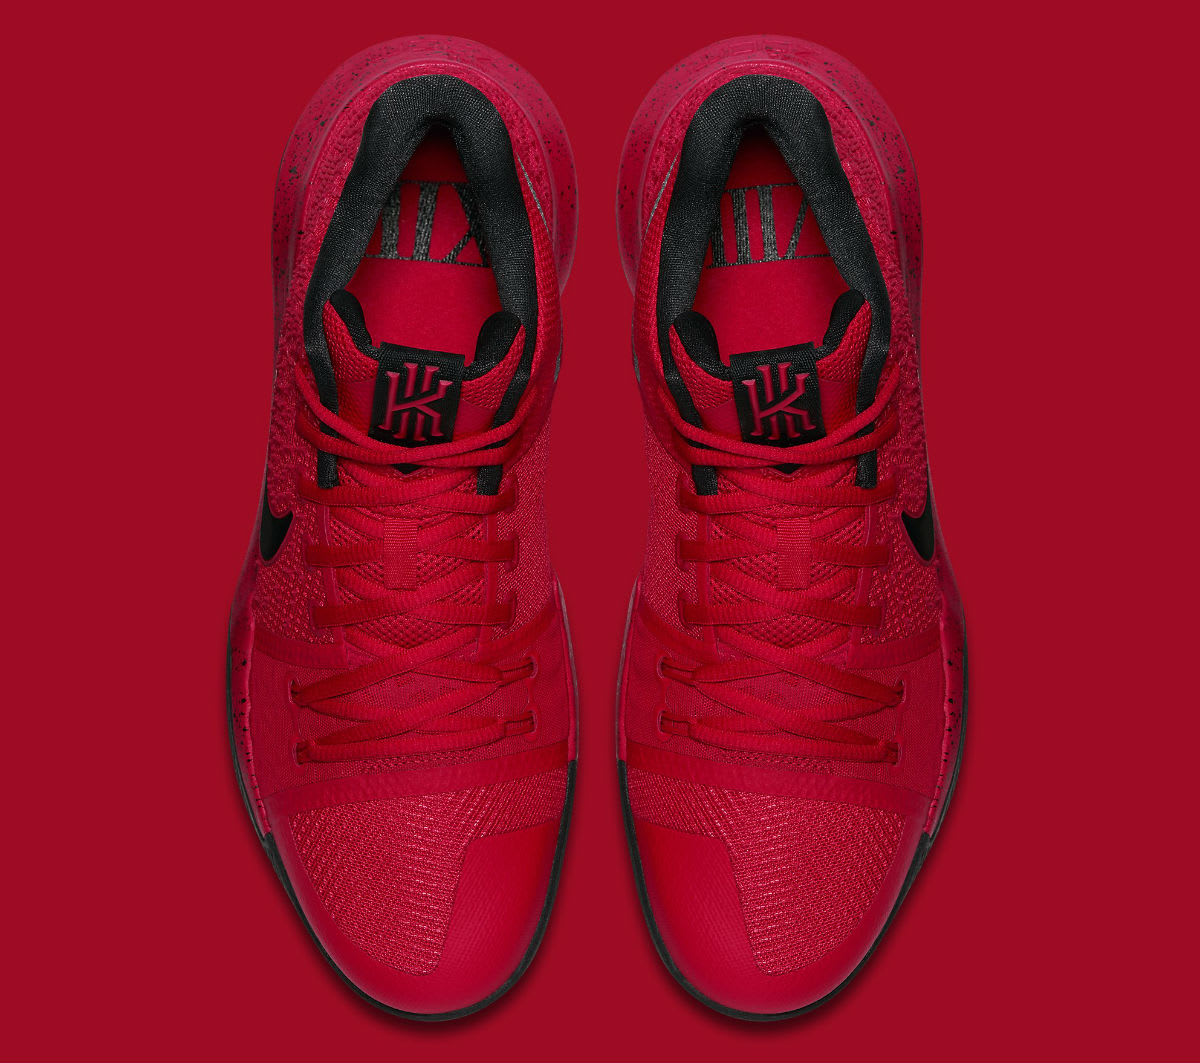 Nike Kyrie 3 Three-Point Contest University Red Release Date Top 852395-600